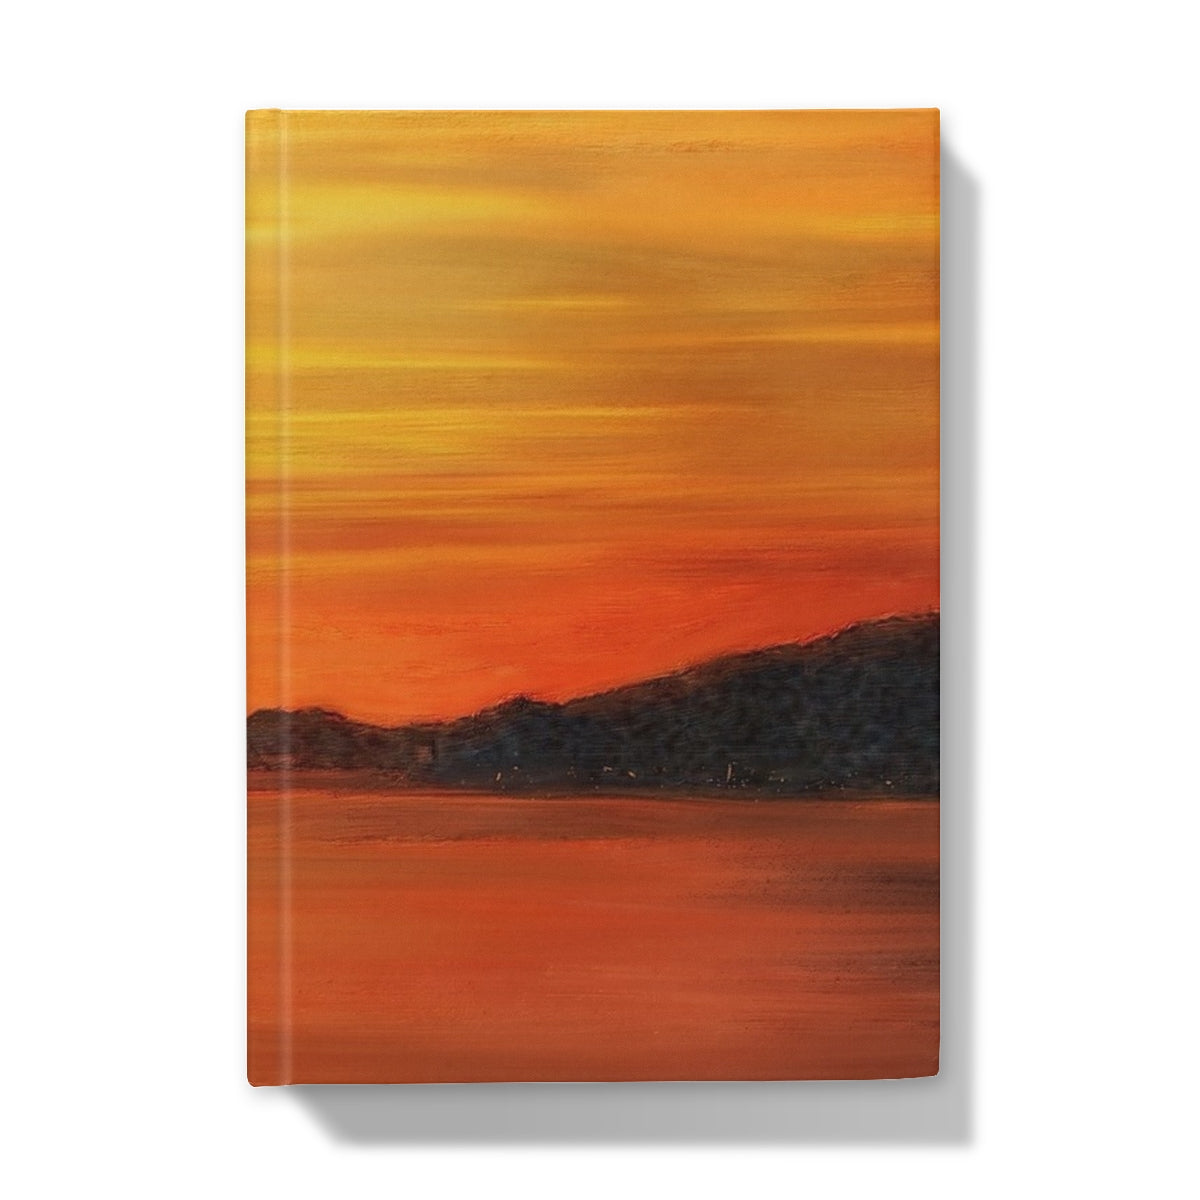 Loch Fyne Sunset Art Gifts Hardback Journal-Journals & Notebooks-Scottish Lochs & Mountains Art Gallery-5"x7"-Lined-Paintings, Prints, Homeware, Art Gifts From Scotland By Scottish Artist Kevin Hunter